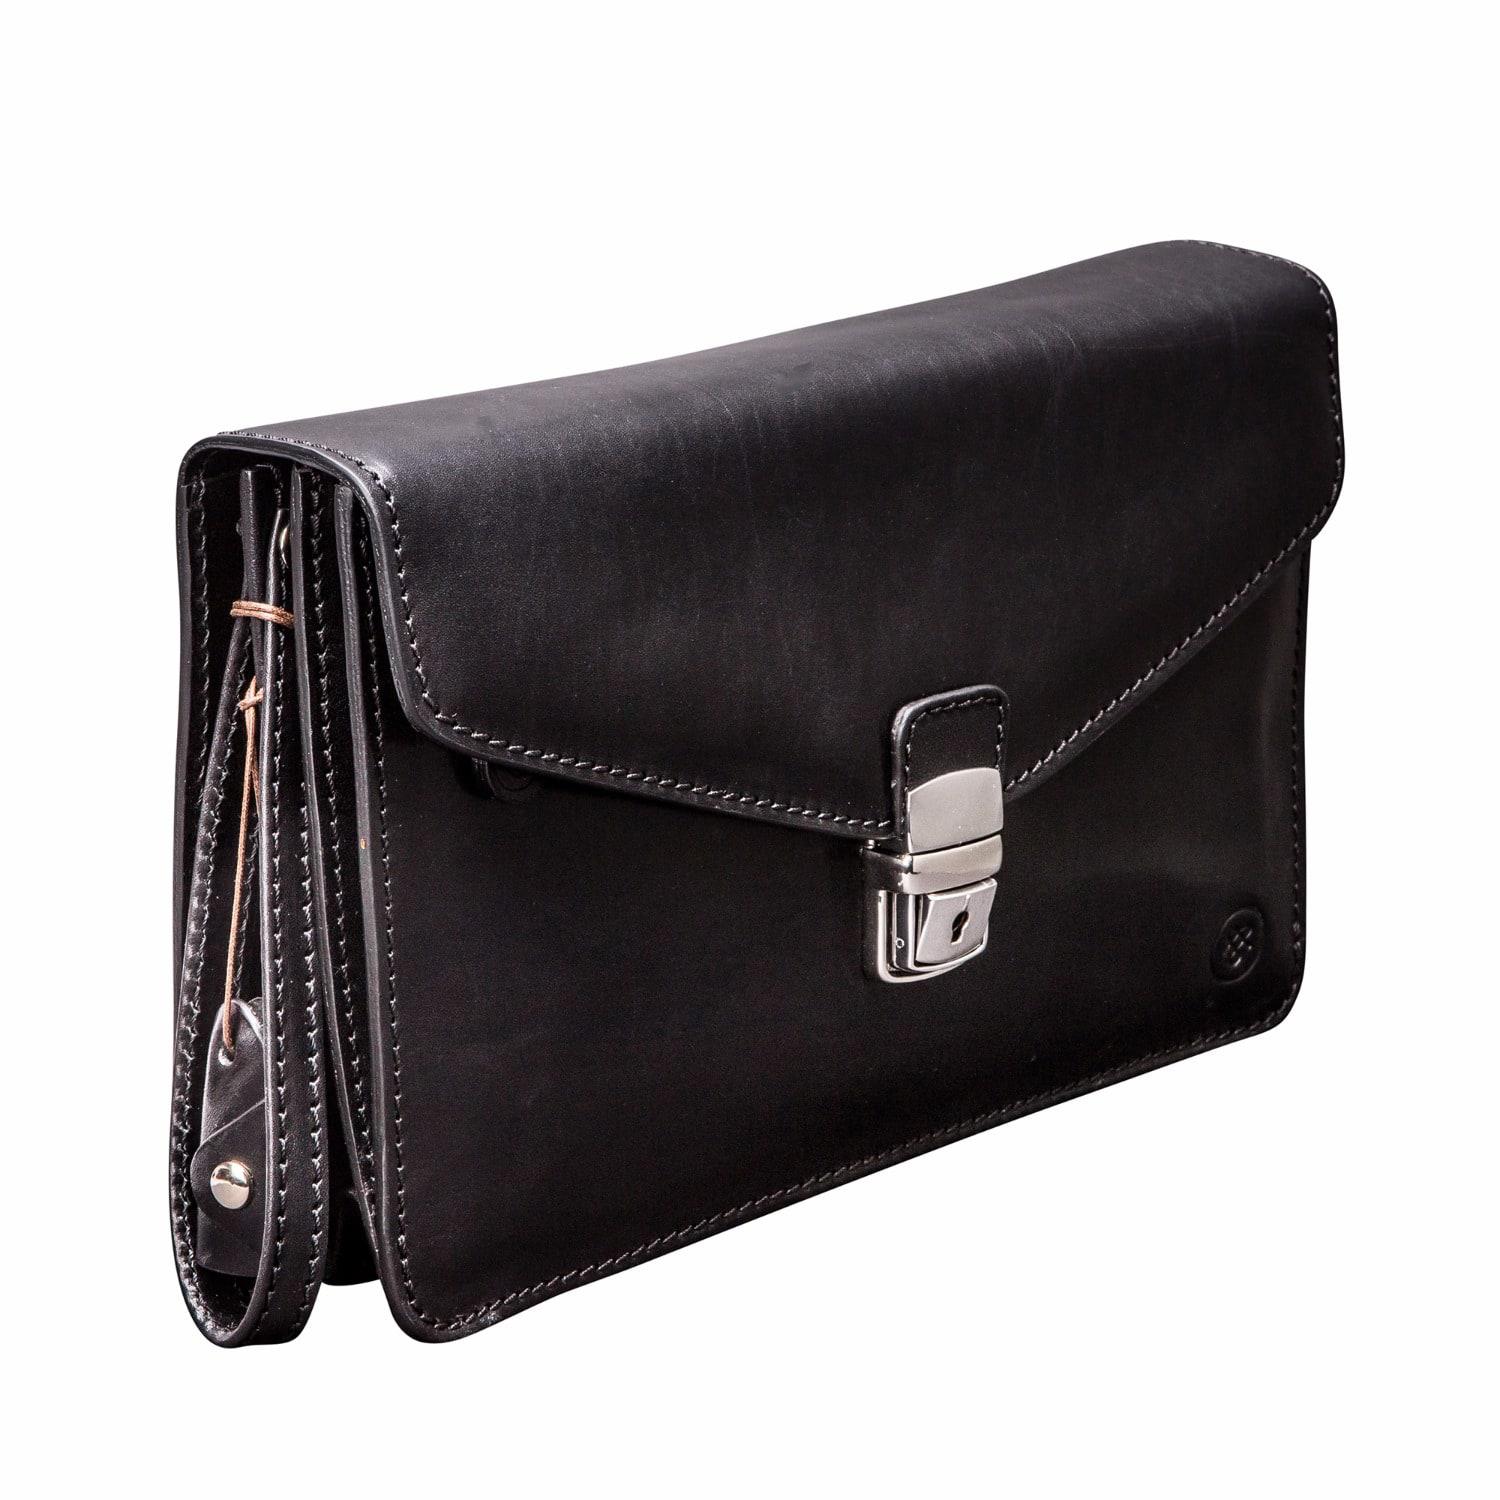 Maxwell Scott Bags The Santino Mens Leather Clutch Bag With Wrist Strap  Black for Men | Lyst Canada